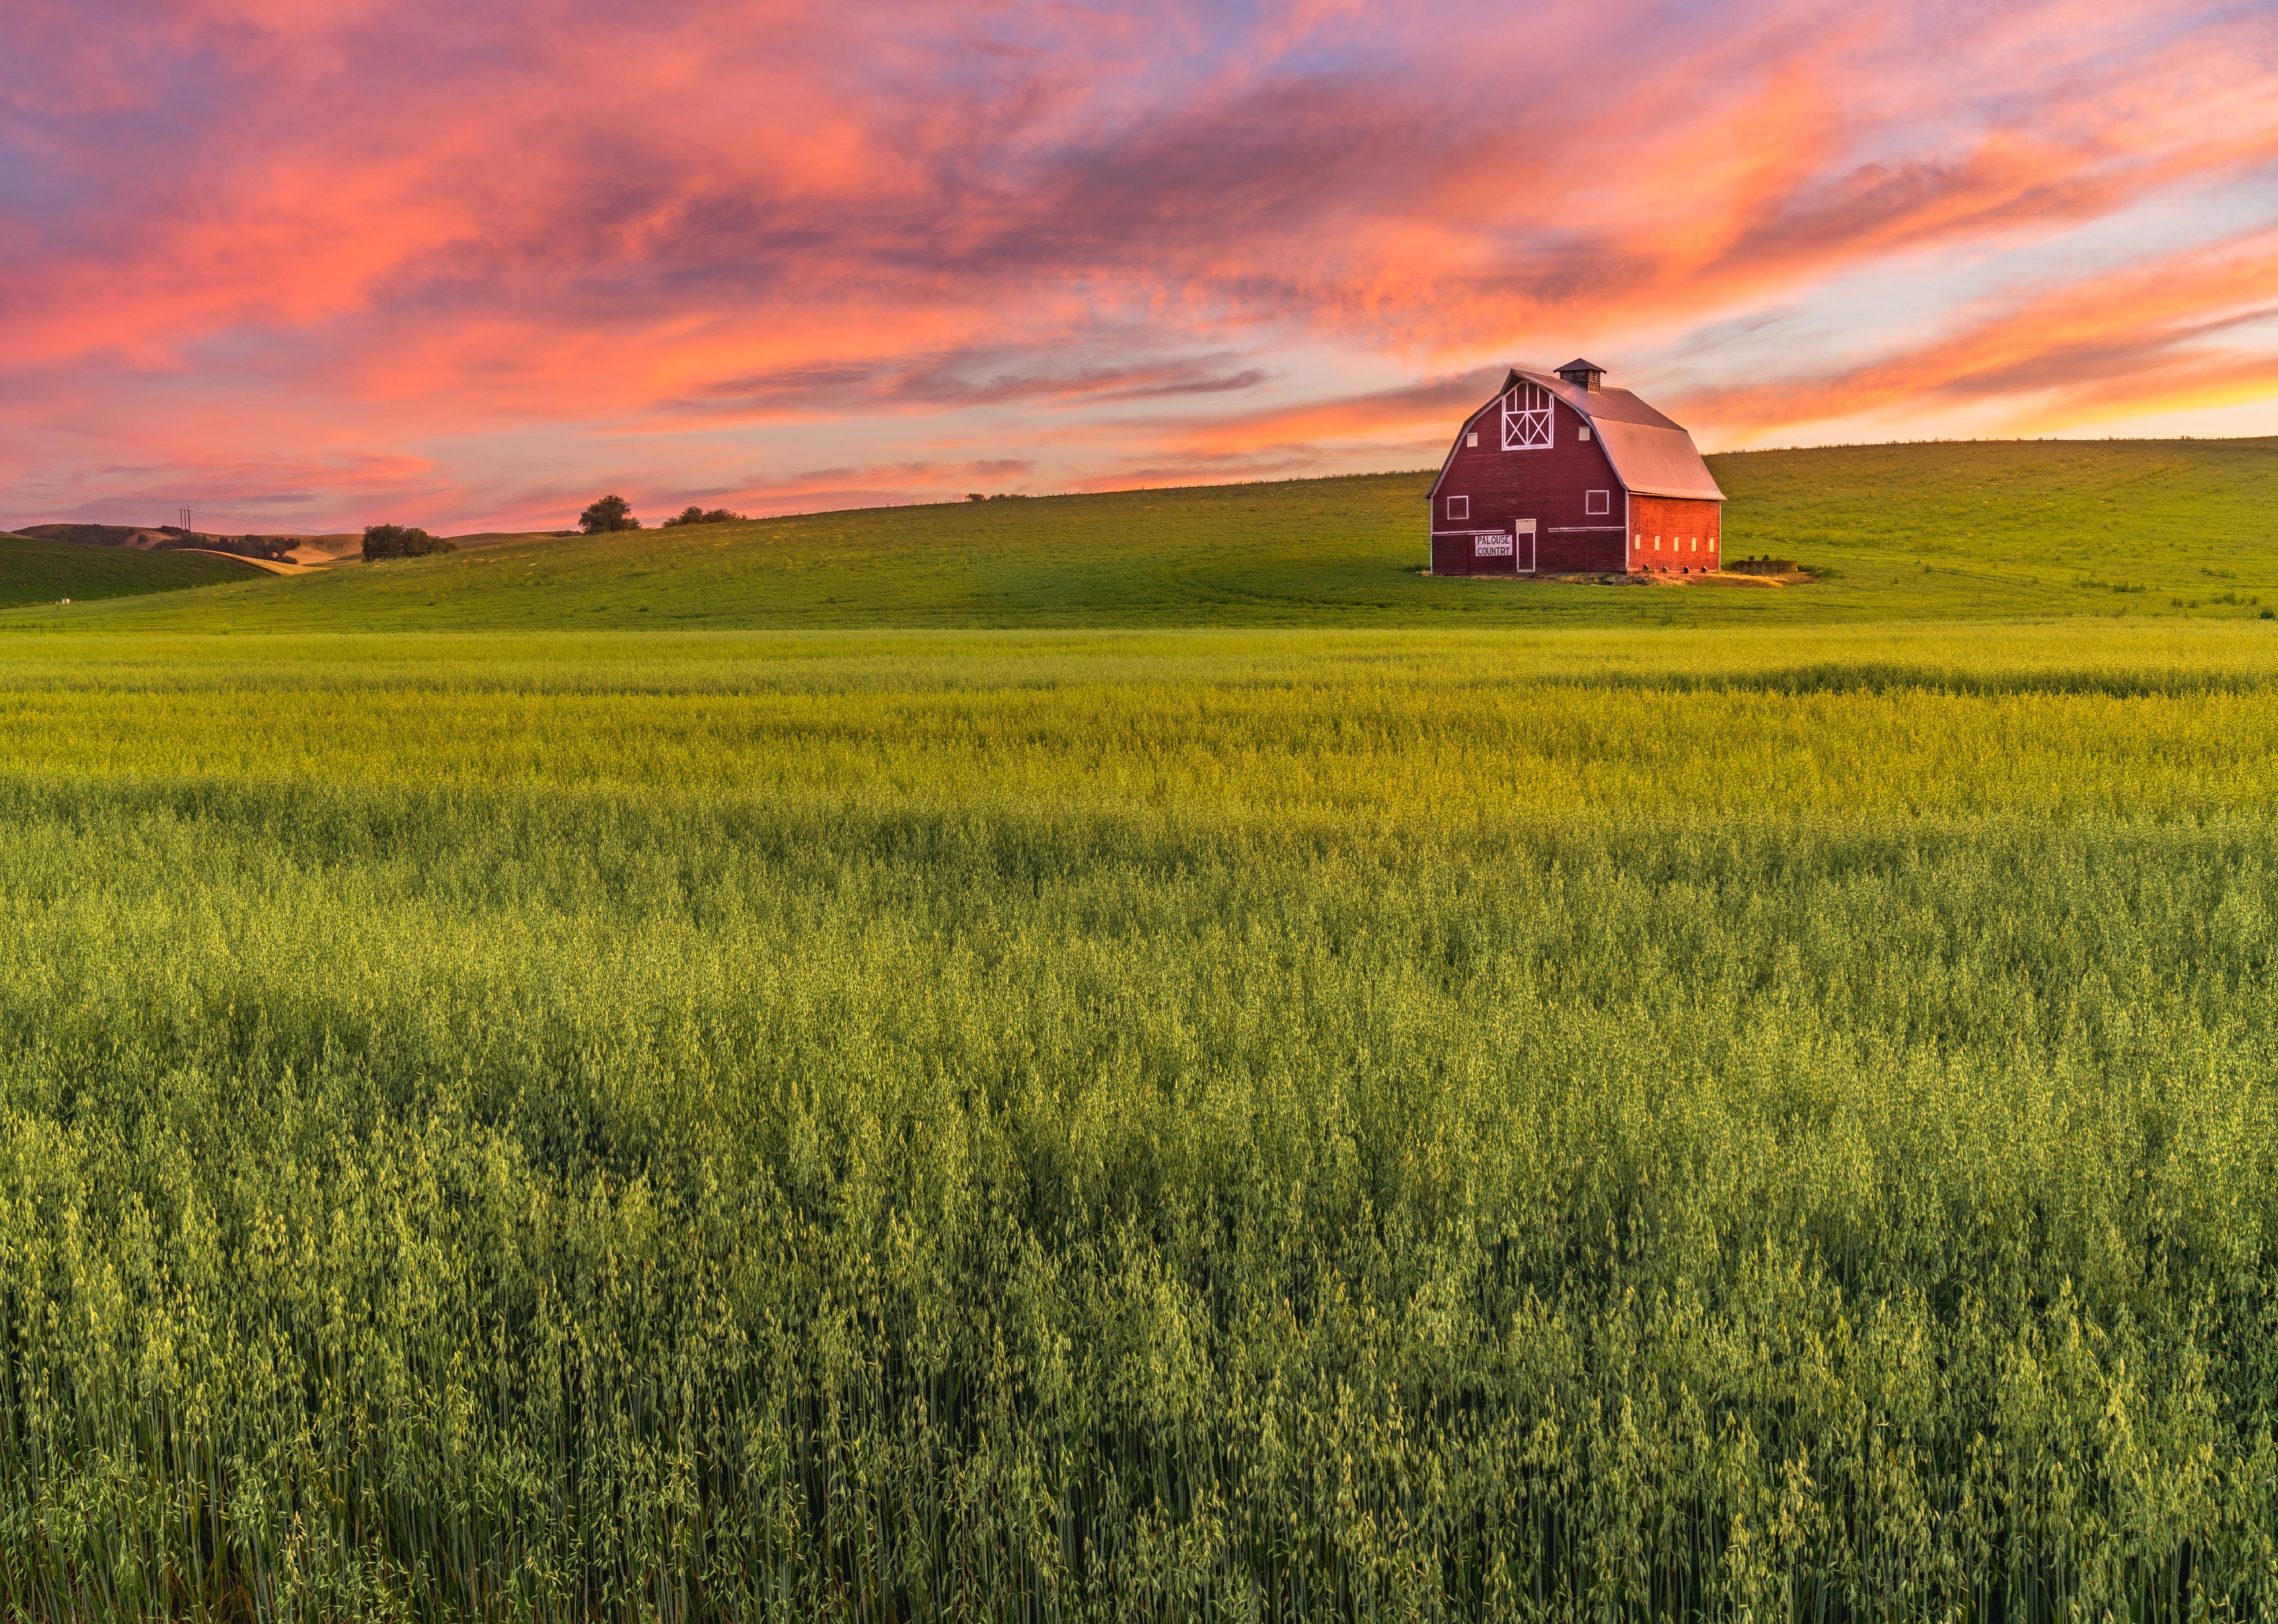 Red barn in a field at sunset.